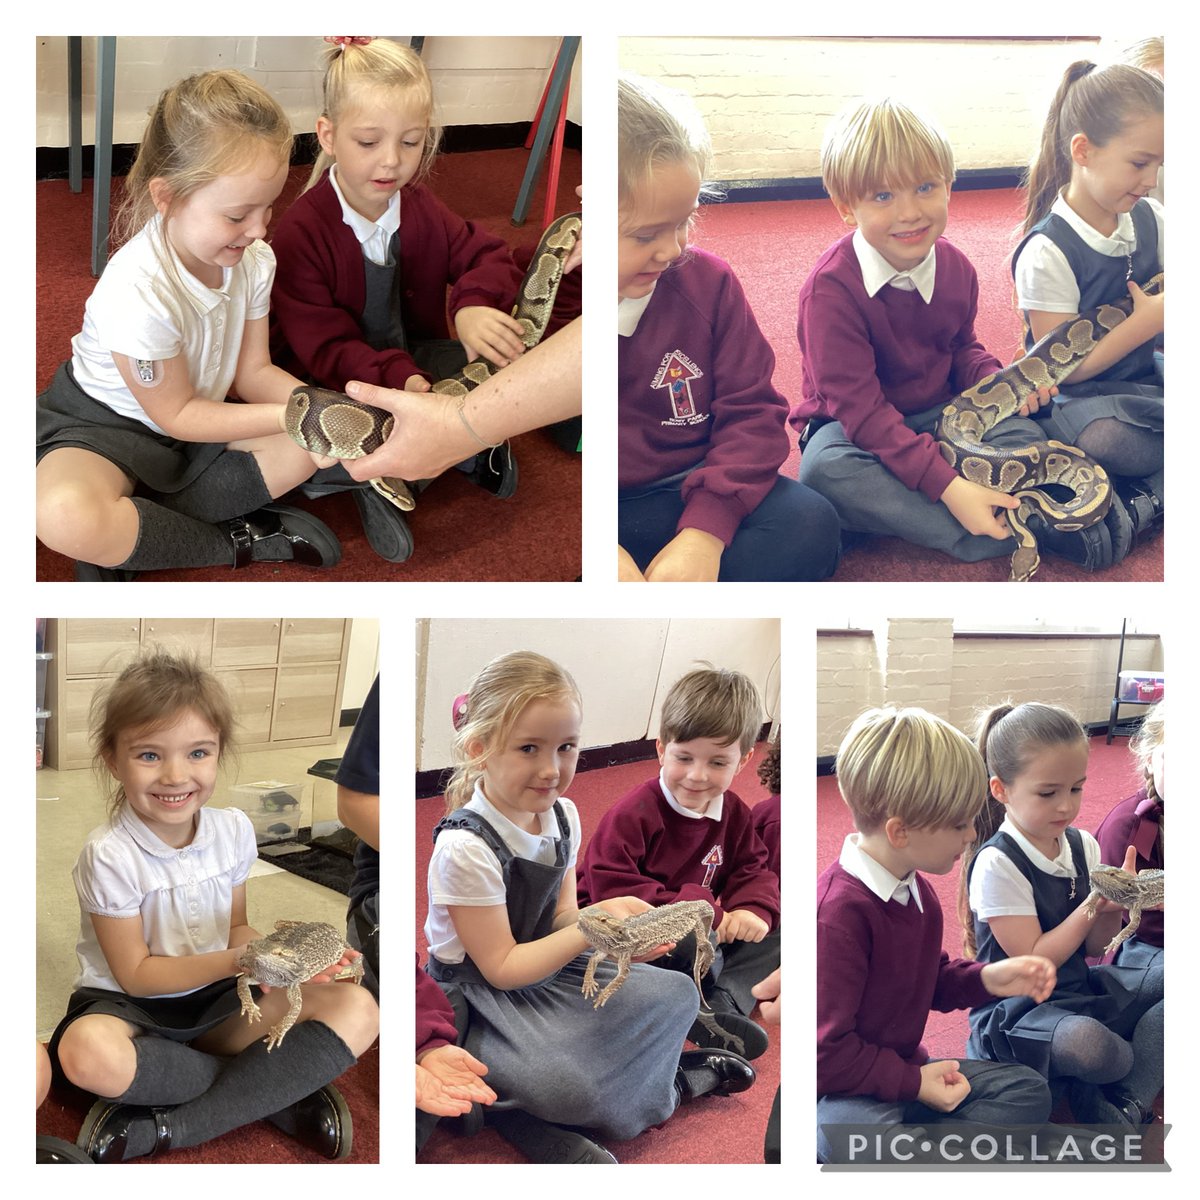 Our workshop with @AnimalsTakeOver today allowed us to meet and hold some of the animals we have been learning about in science -amphibians, birds, reptiles and mammals! We spoke about their habitats, diets and sleeping habits too!🐍🦉🐸🦎🐹 #RPScience #RPEnrichment @CAHKnowsley